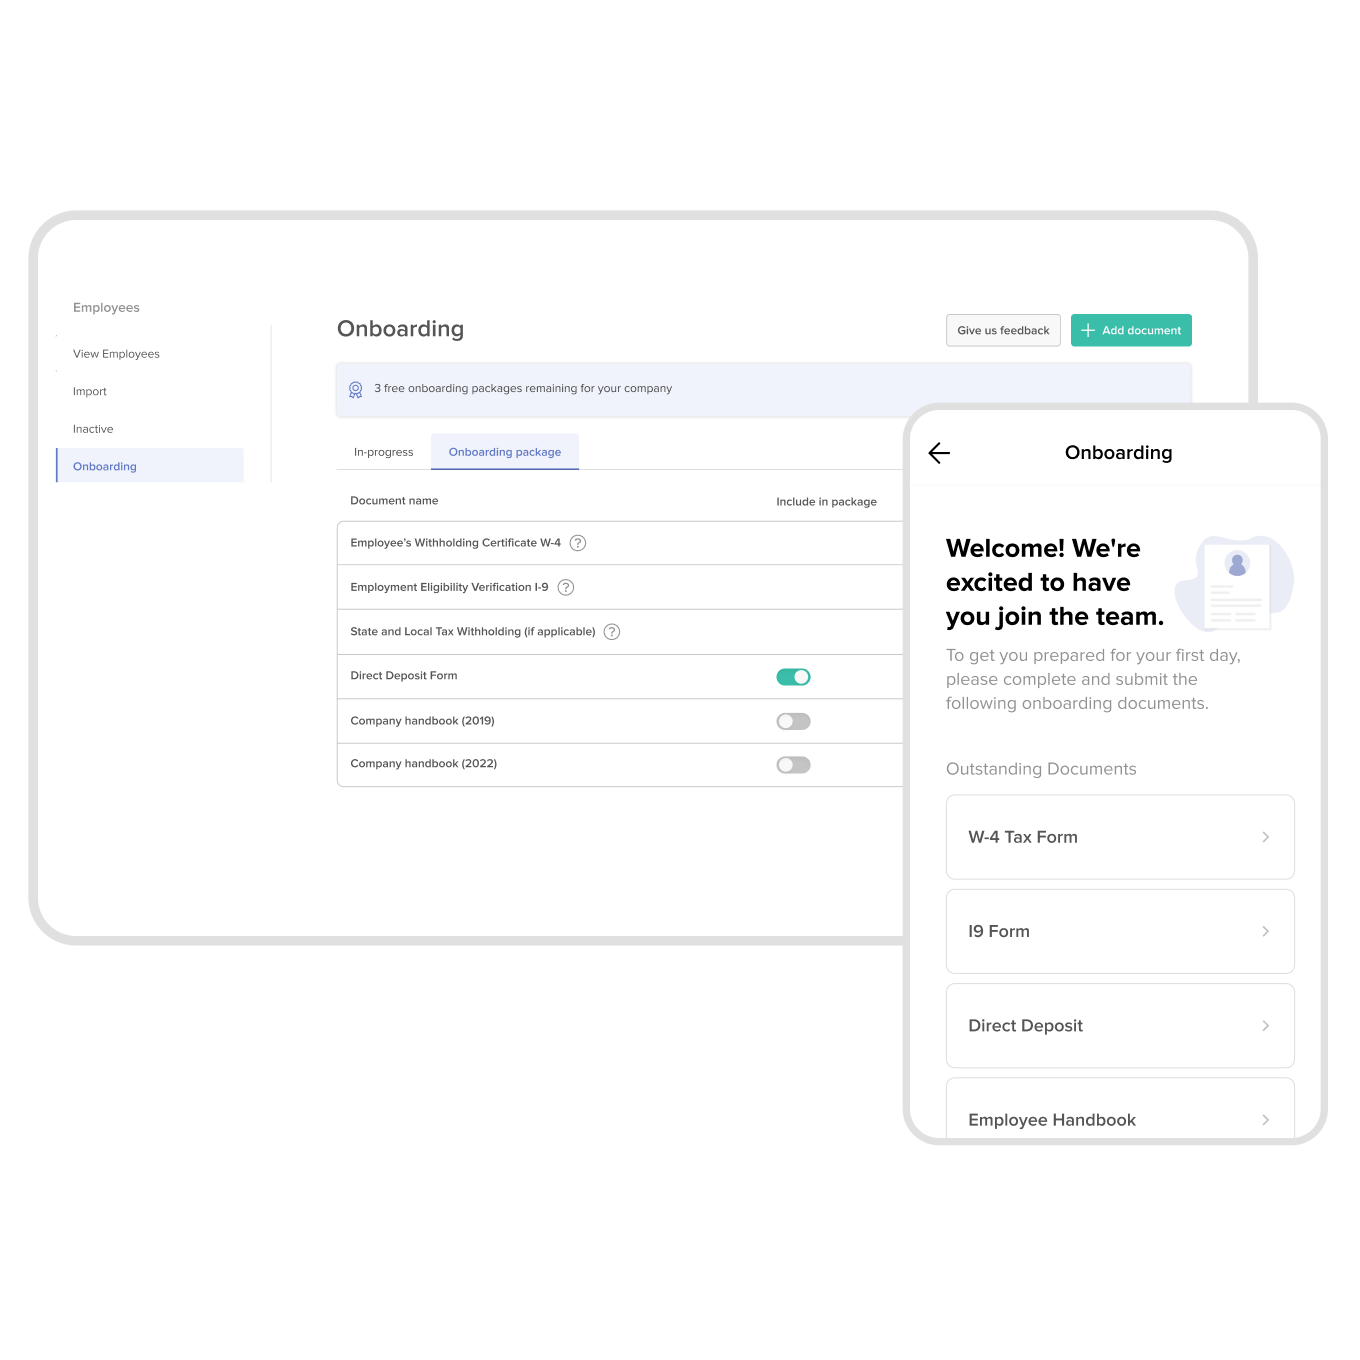 Access all of your employee onboarding documents from the onboarding flow